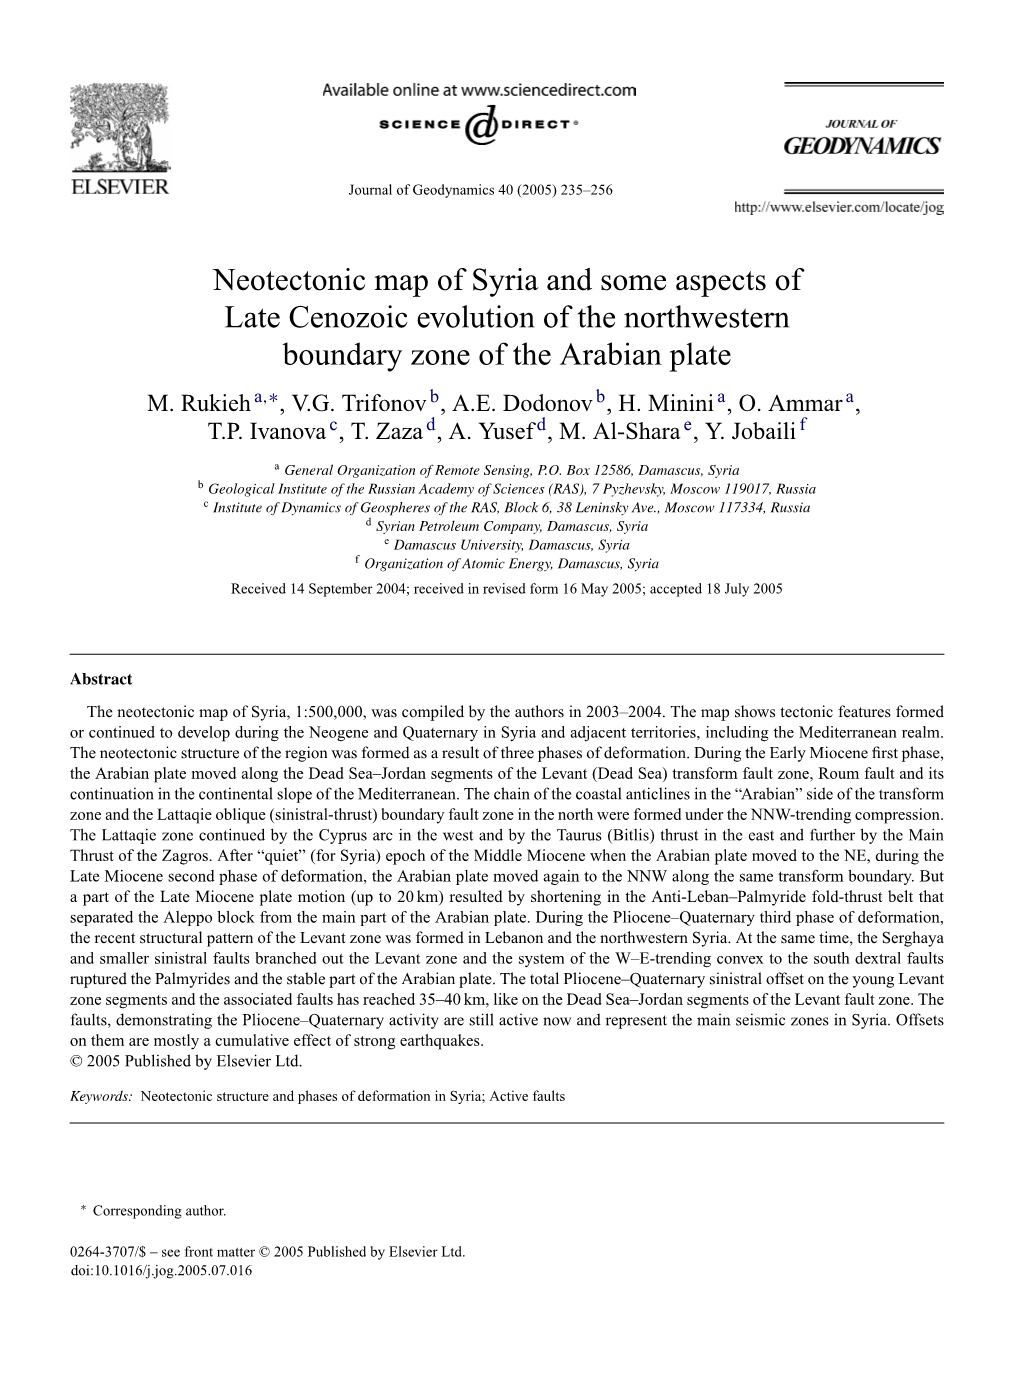 Neotectonic Map of Syria and Some Aspects of Late Cenozoic Evolution of the Northwestern Boundary Zone of the Arabian Plate M